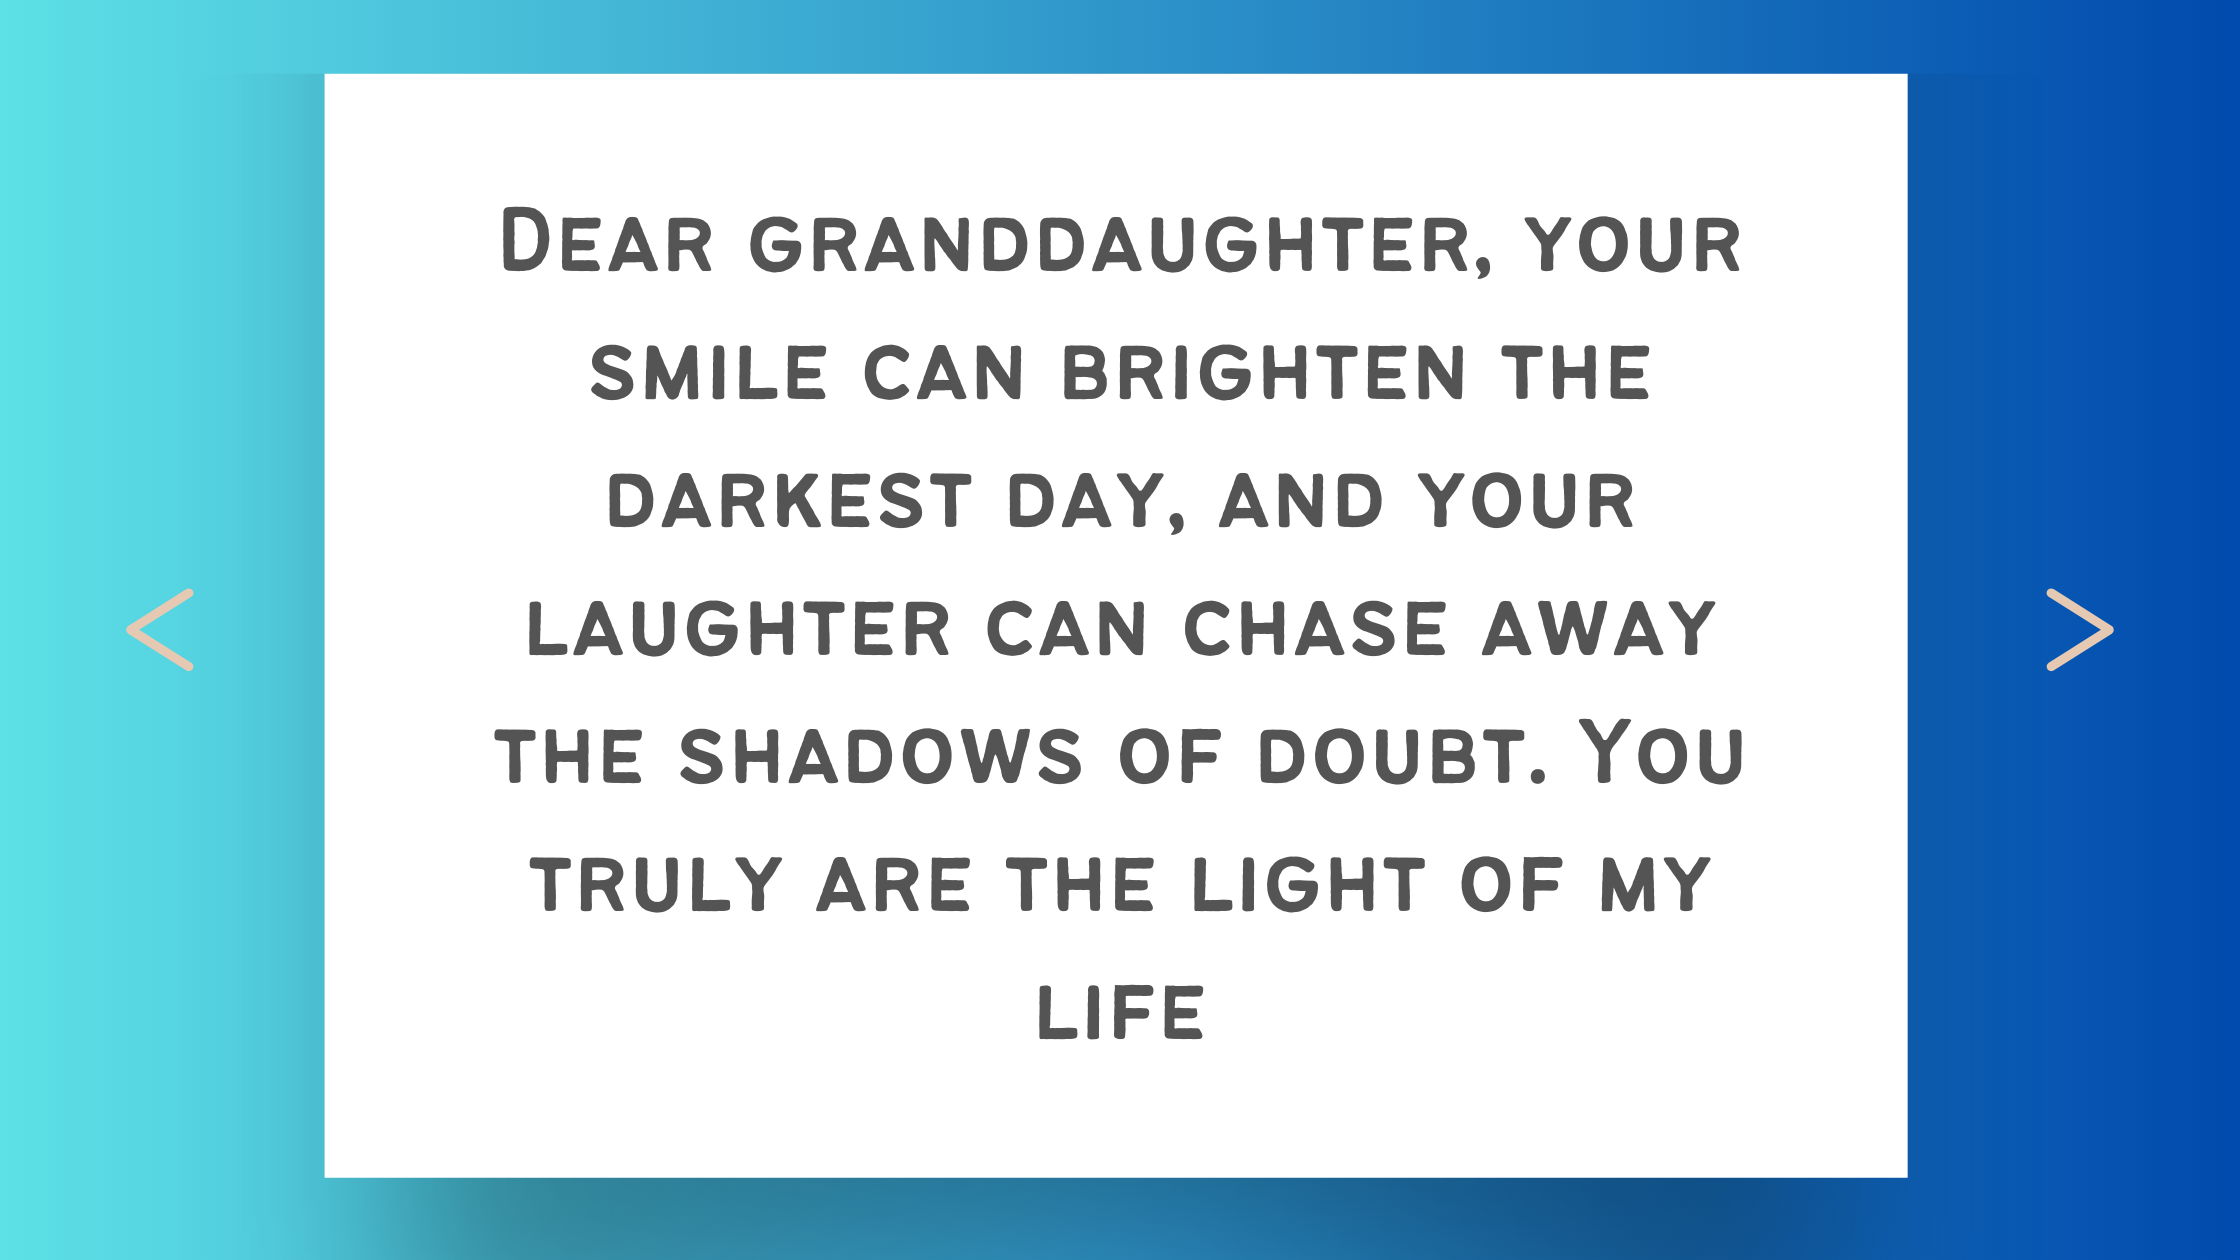 10 Heartwarming Quotes for Granddaughter from Grandma to Cherish Today, May 22